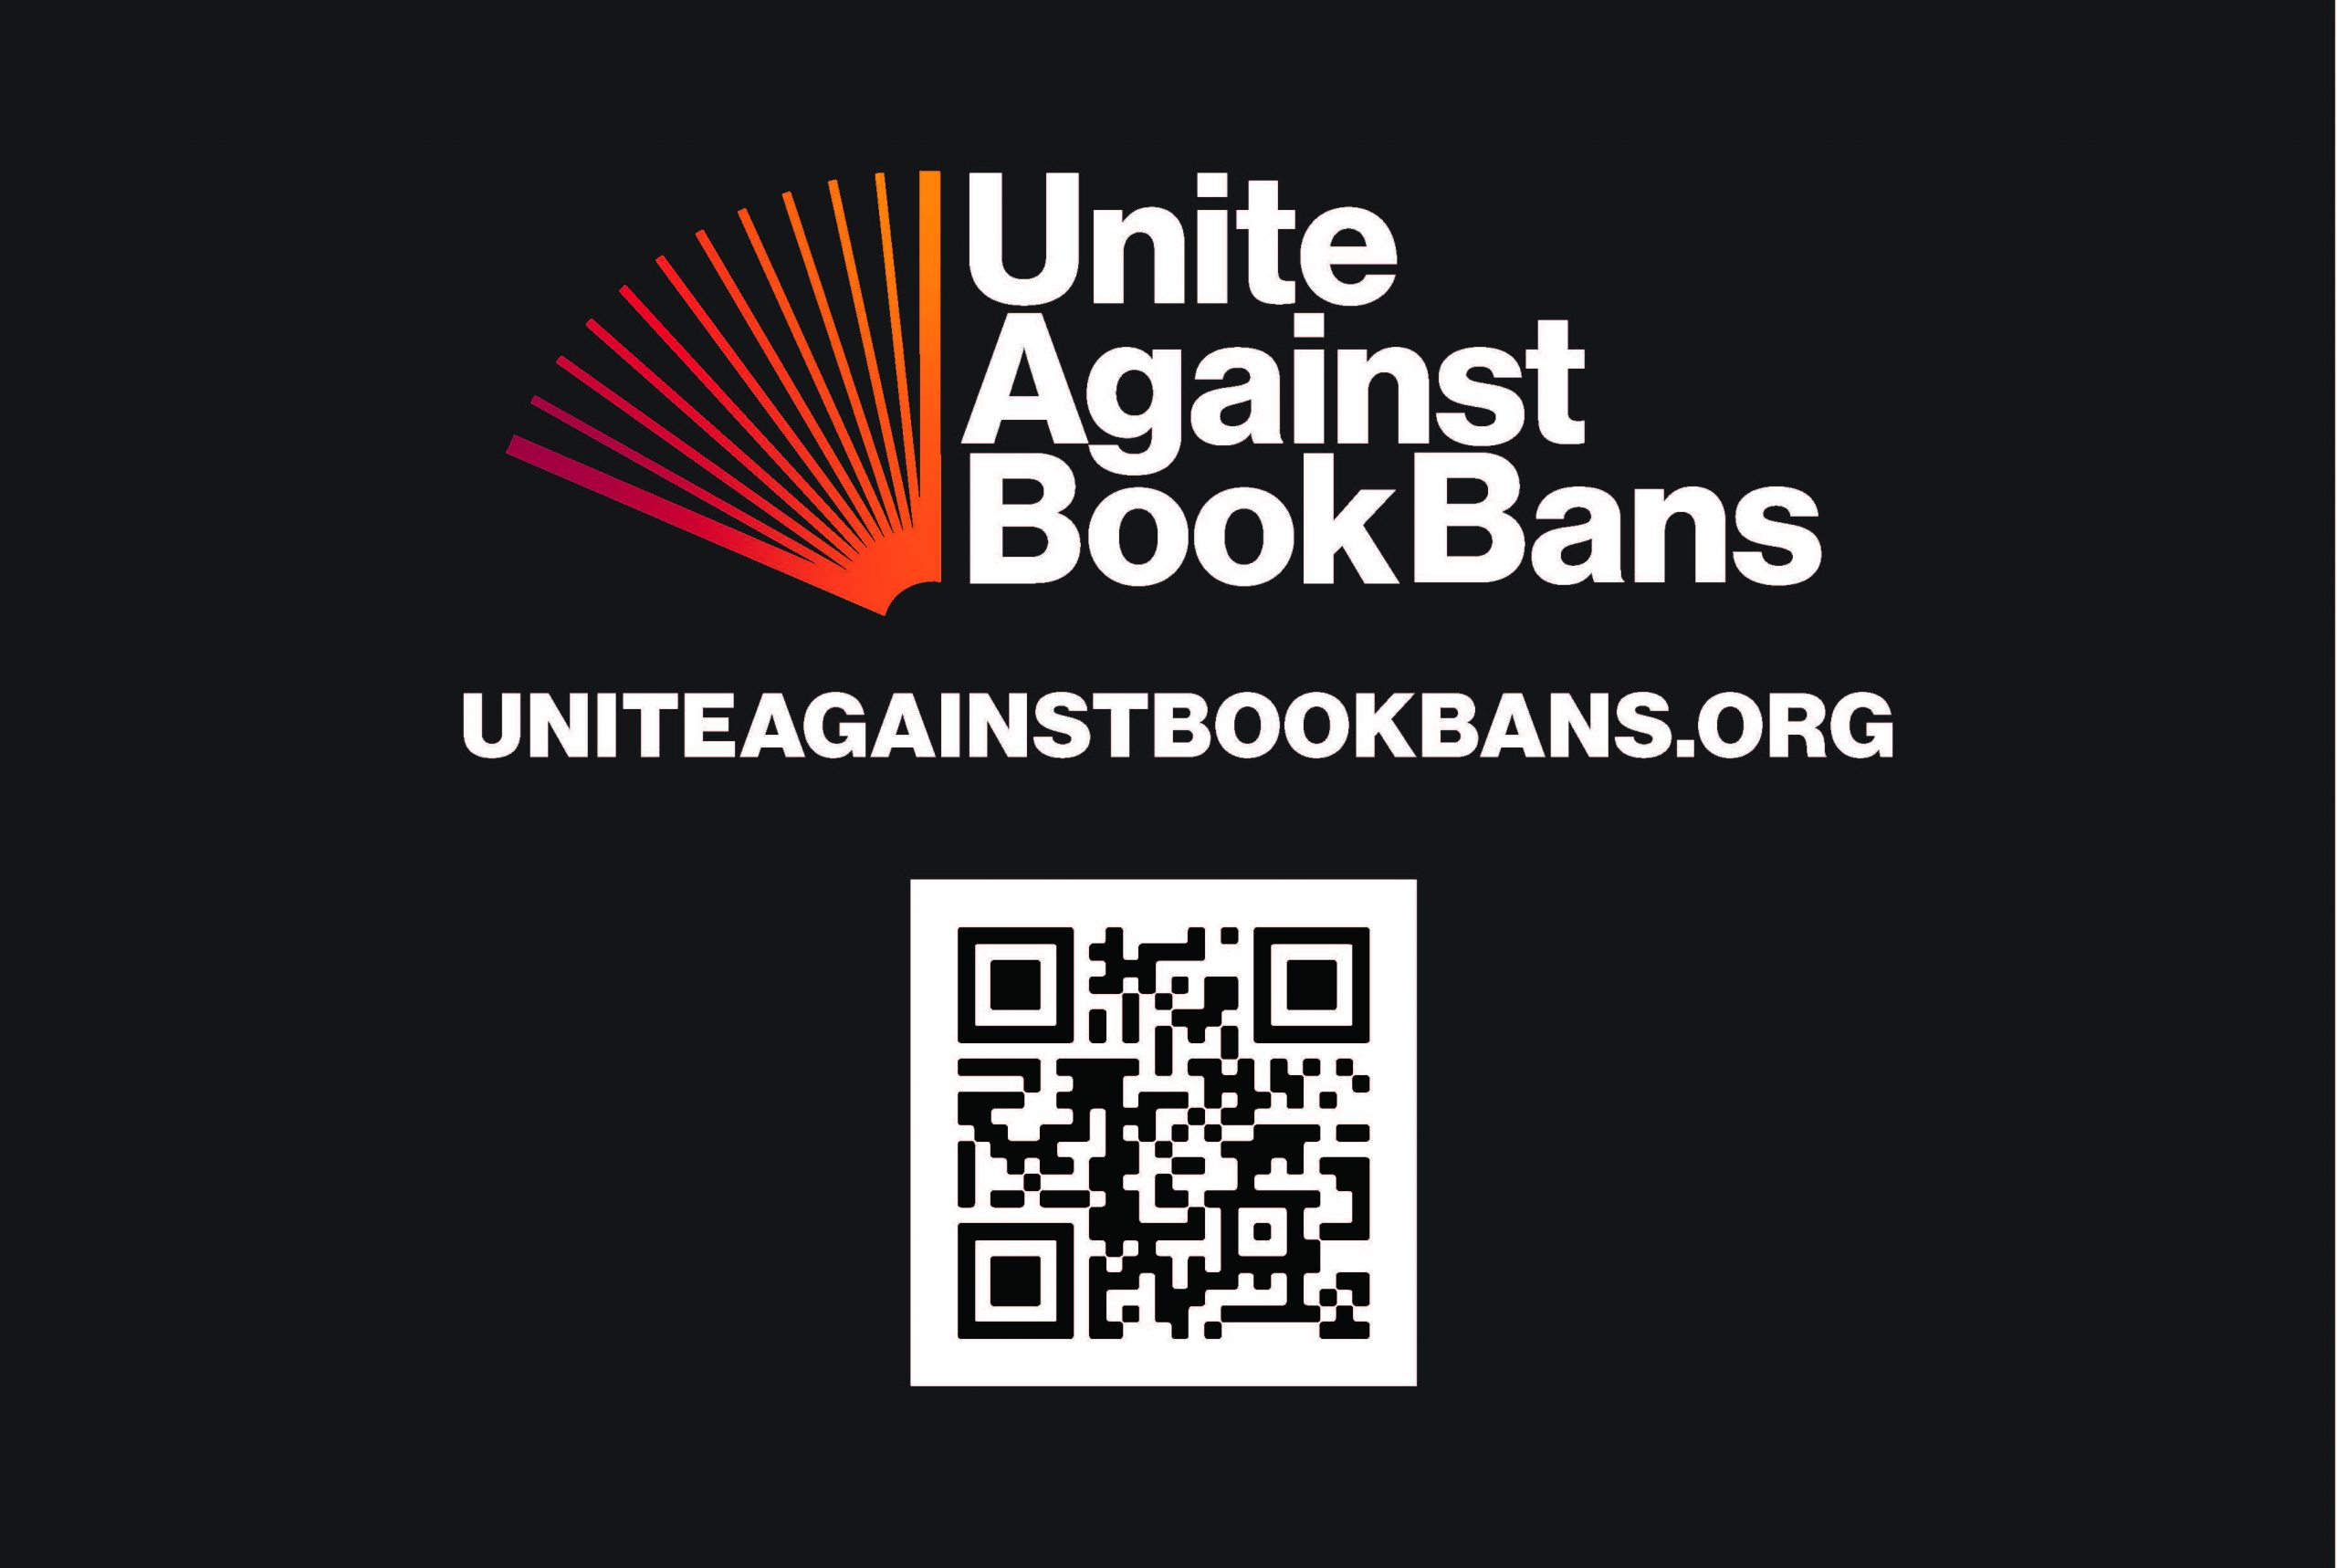 Black image with Unite Against Book Bans logo and URL and QR code